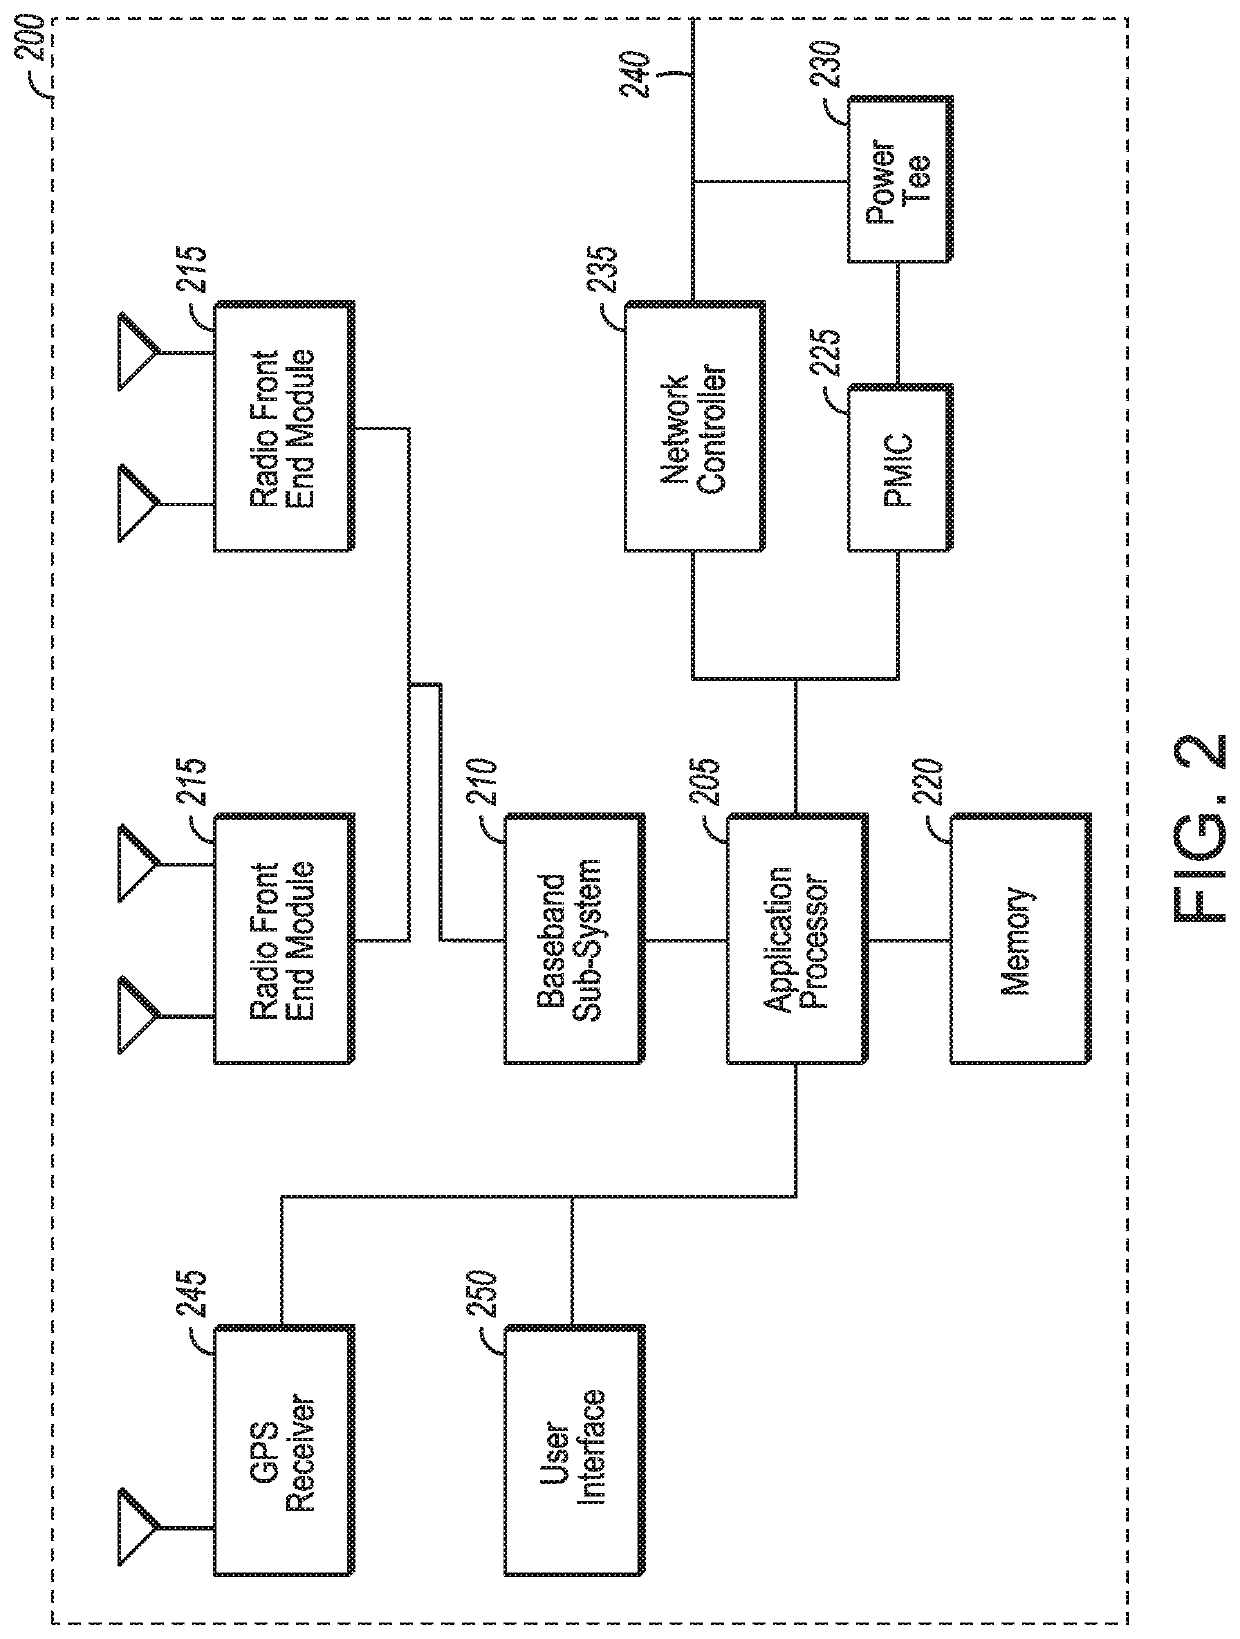 Wake up signal for machine type communication and narrowband-internet-of-things devices